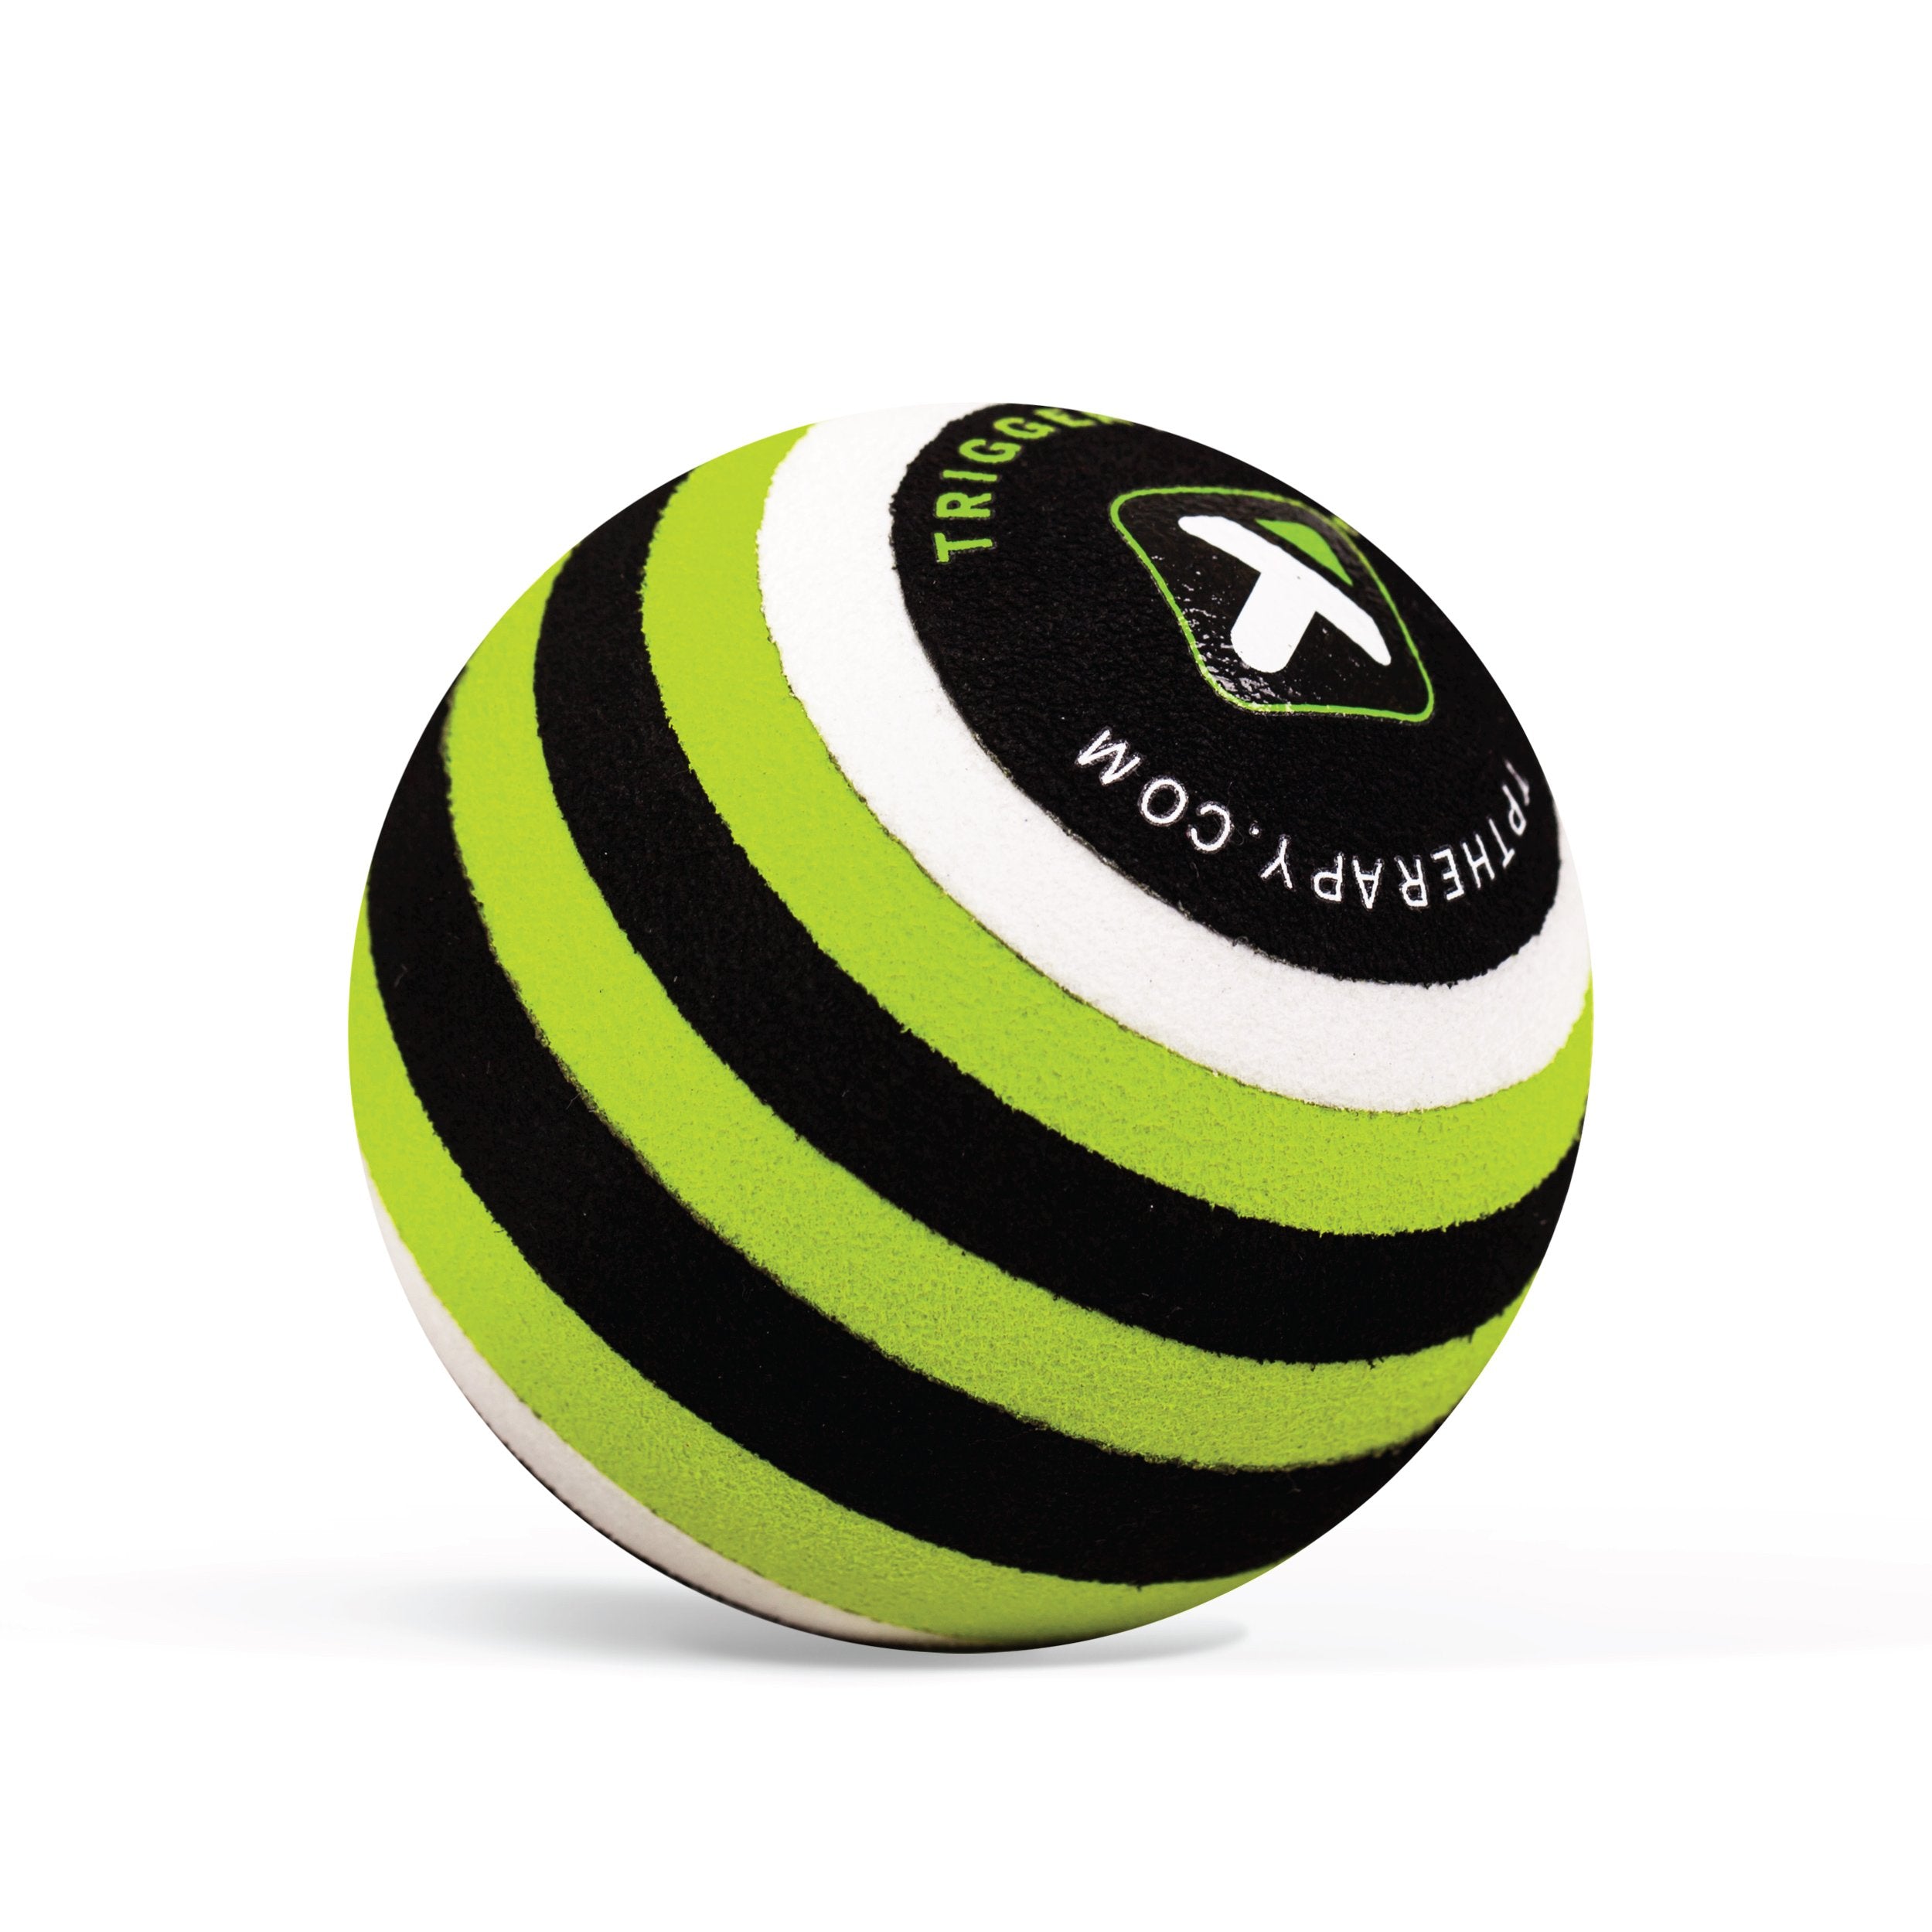 TriggerPoint Unisex's MB5, Deep Tissue, Massage Ball for Back, Green, White and Black, 5''/12.7cm